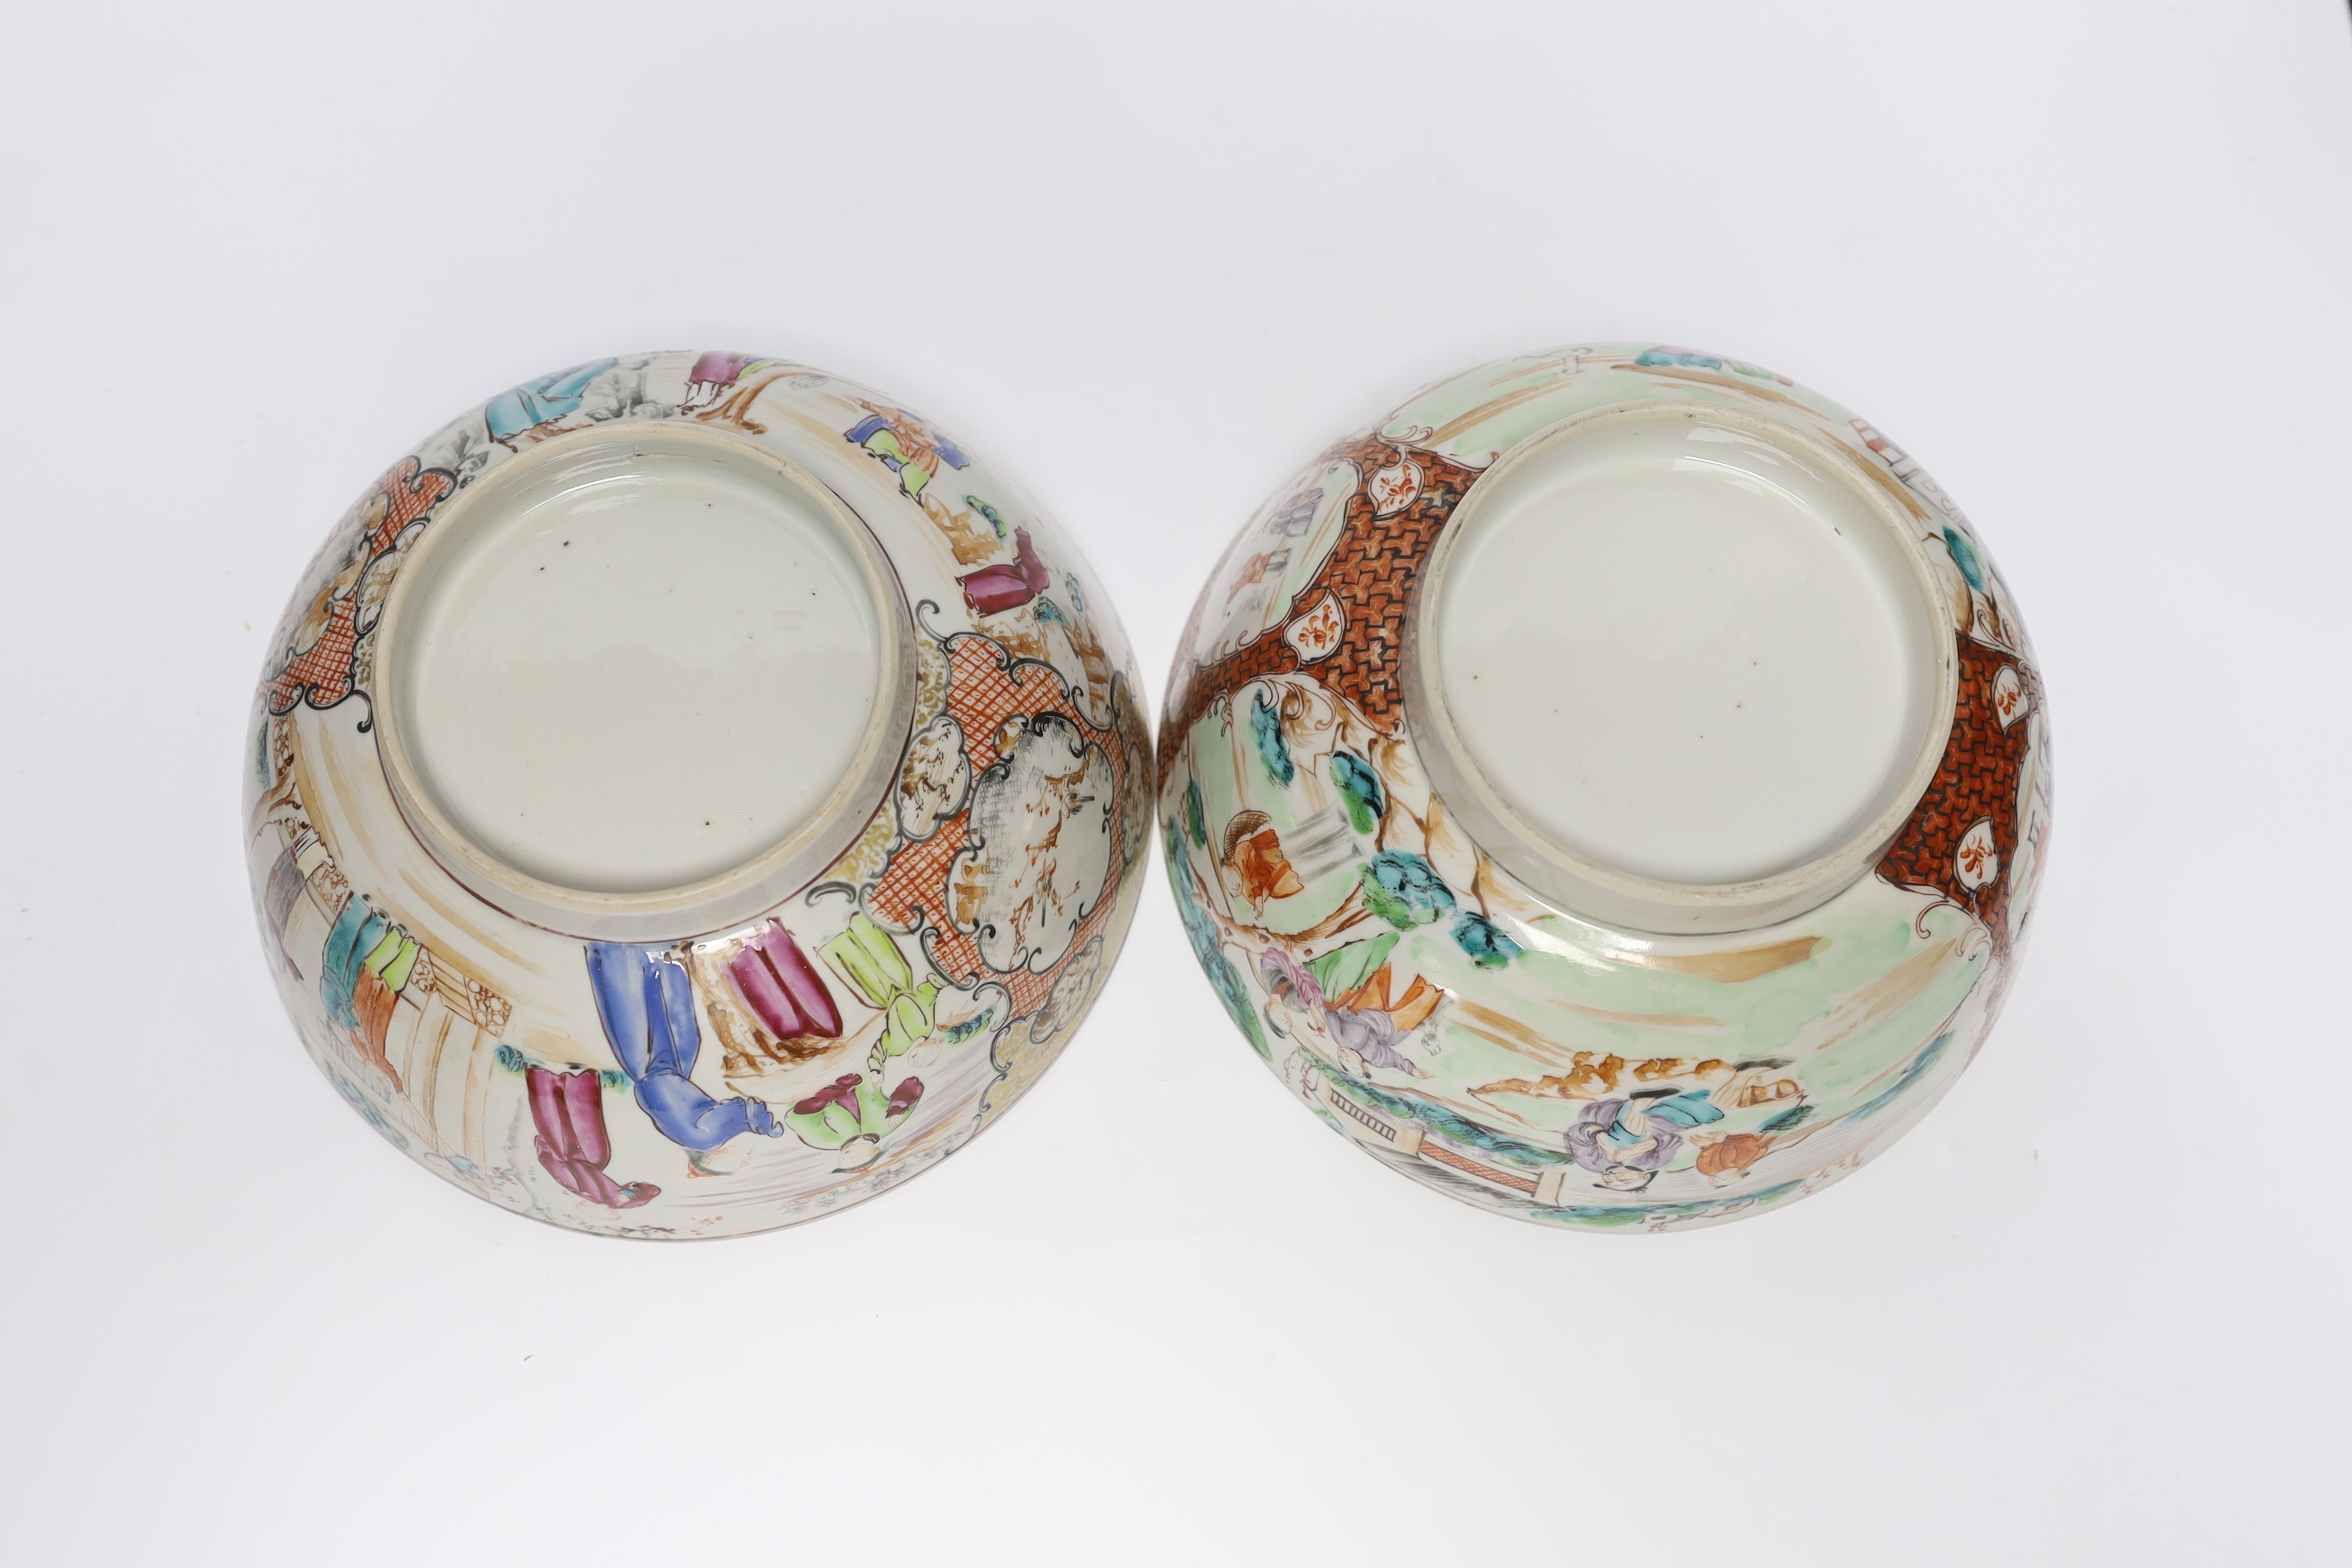 Two 18th century Chinese export famille rose bowls, largest 23cm diameter - Image 5 of 5